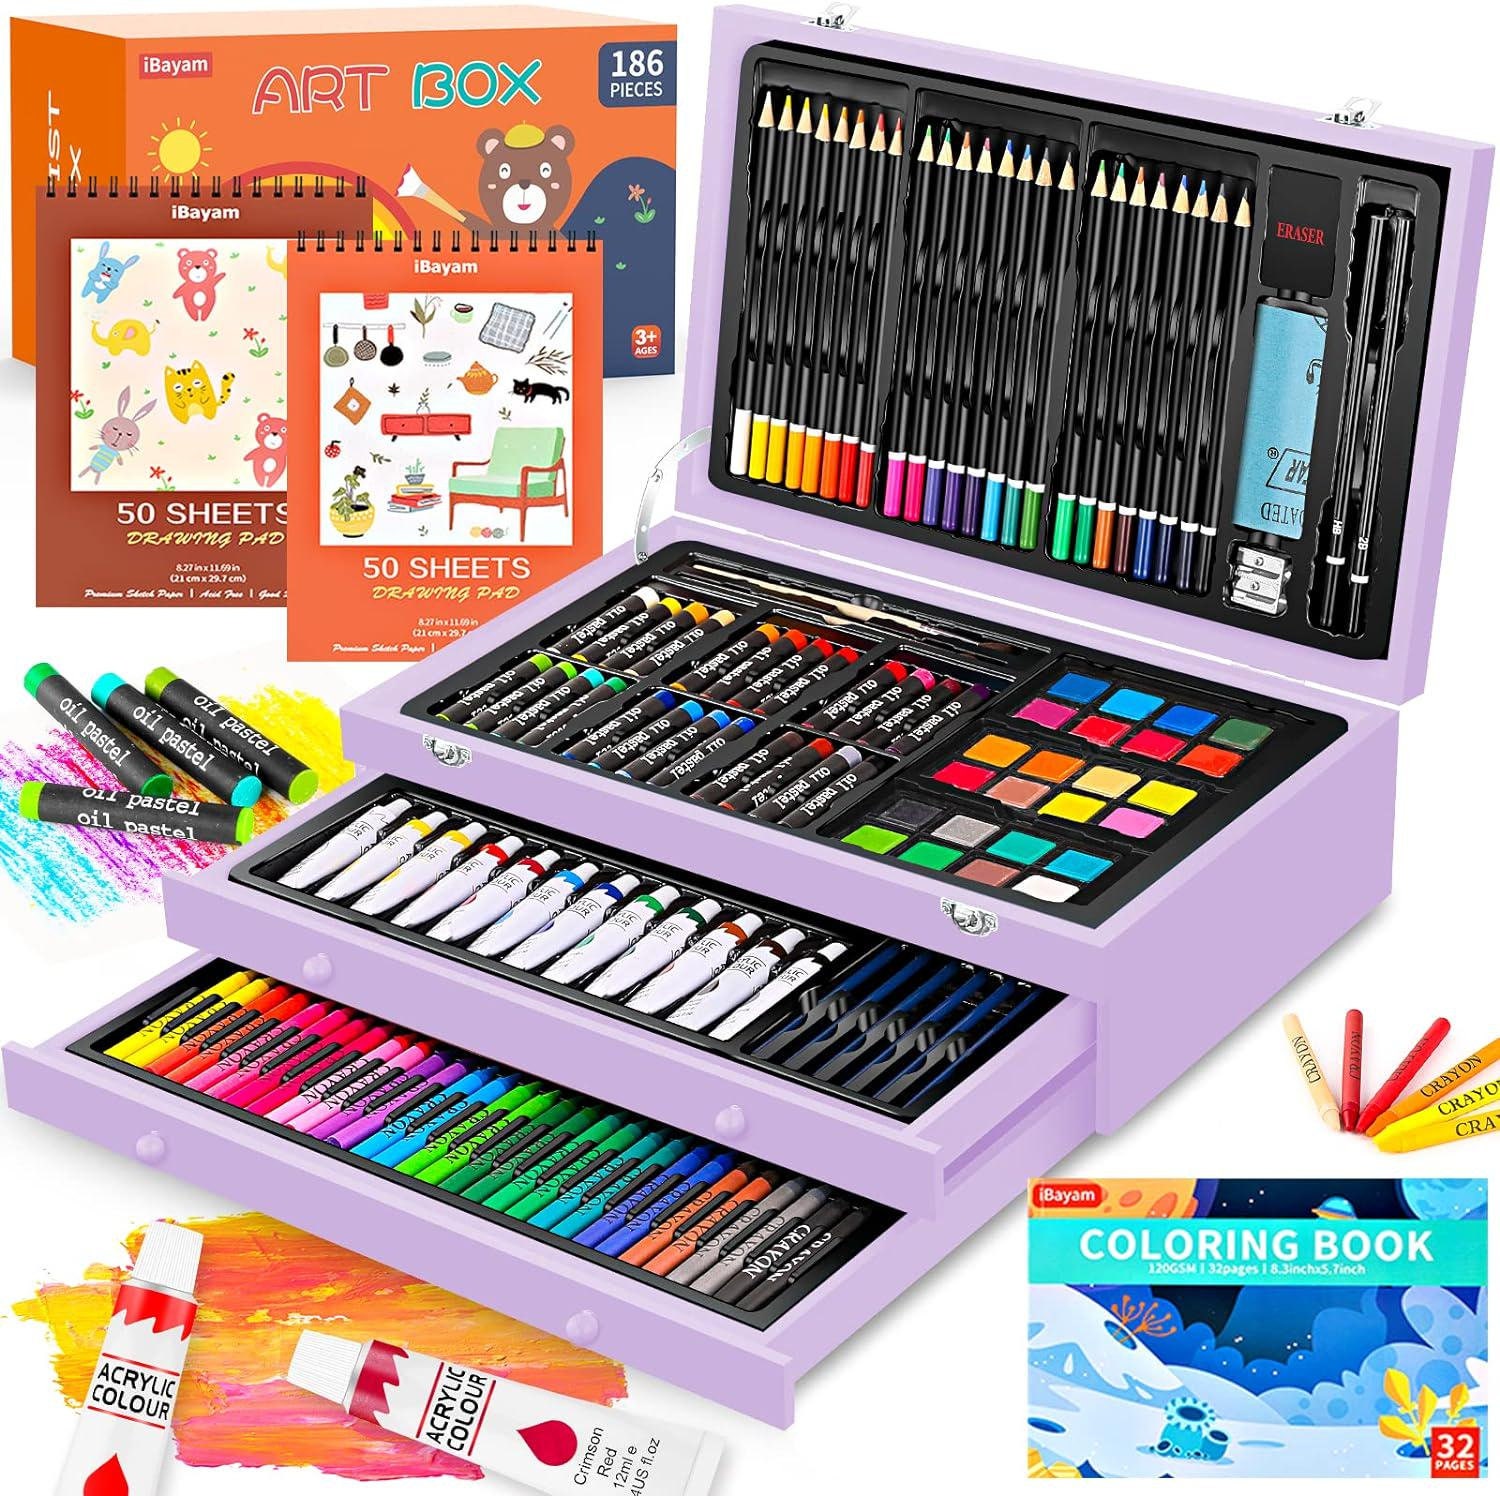 175 Piece Deluxe Art Supplies, Art Set with 2 A4 Drawing Pads, 24 Cherry